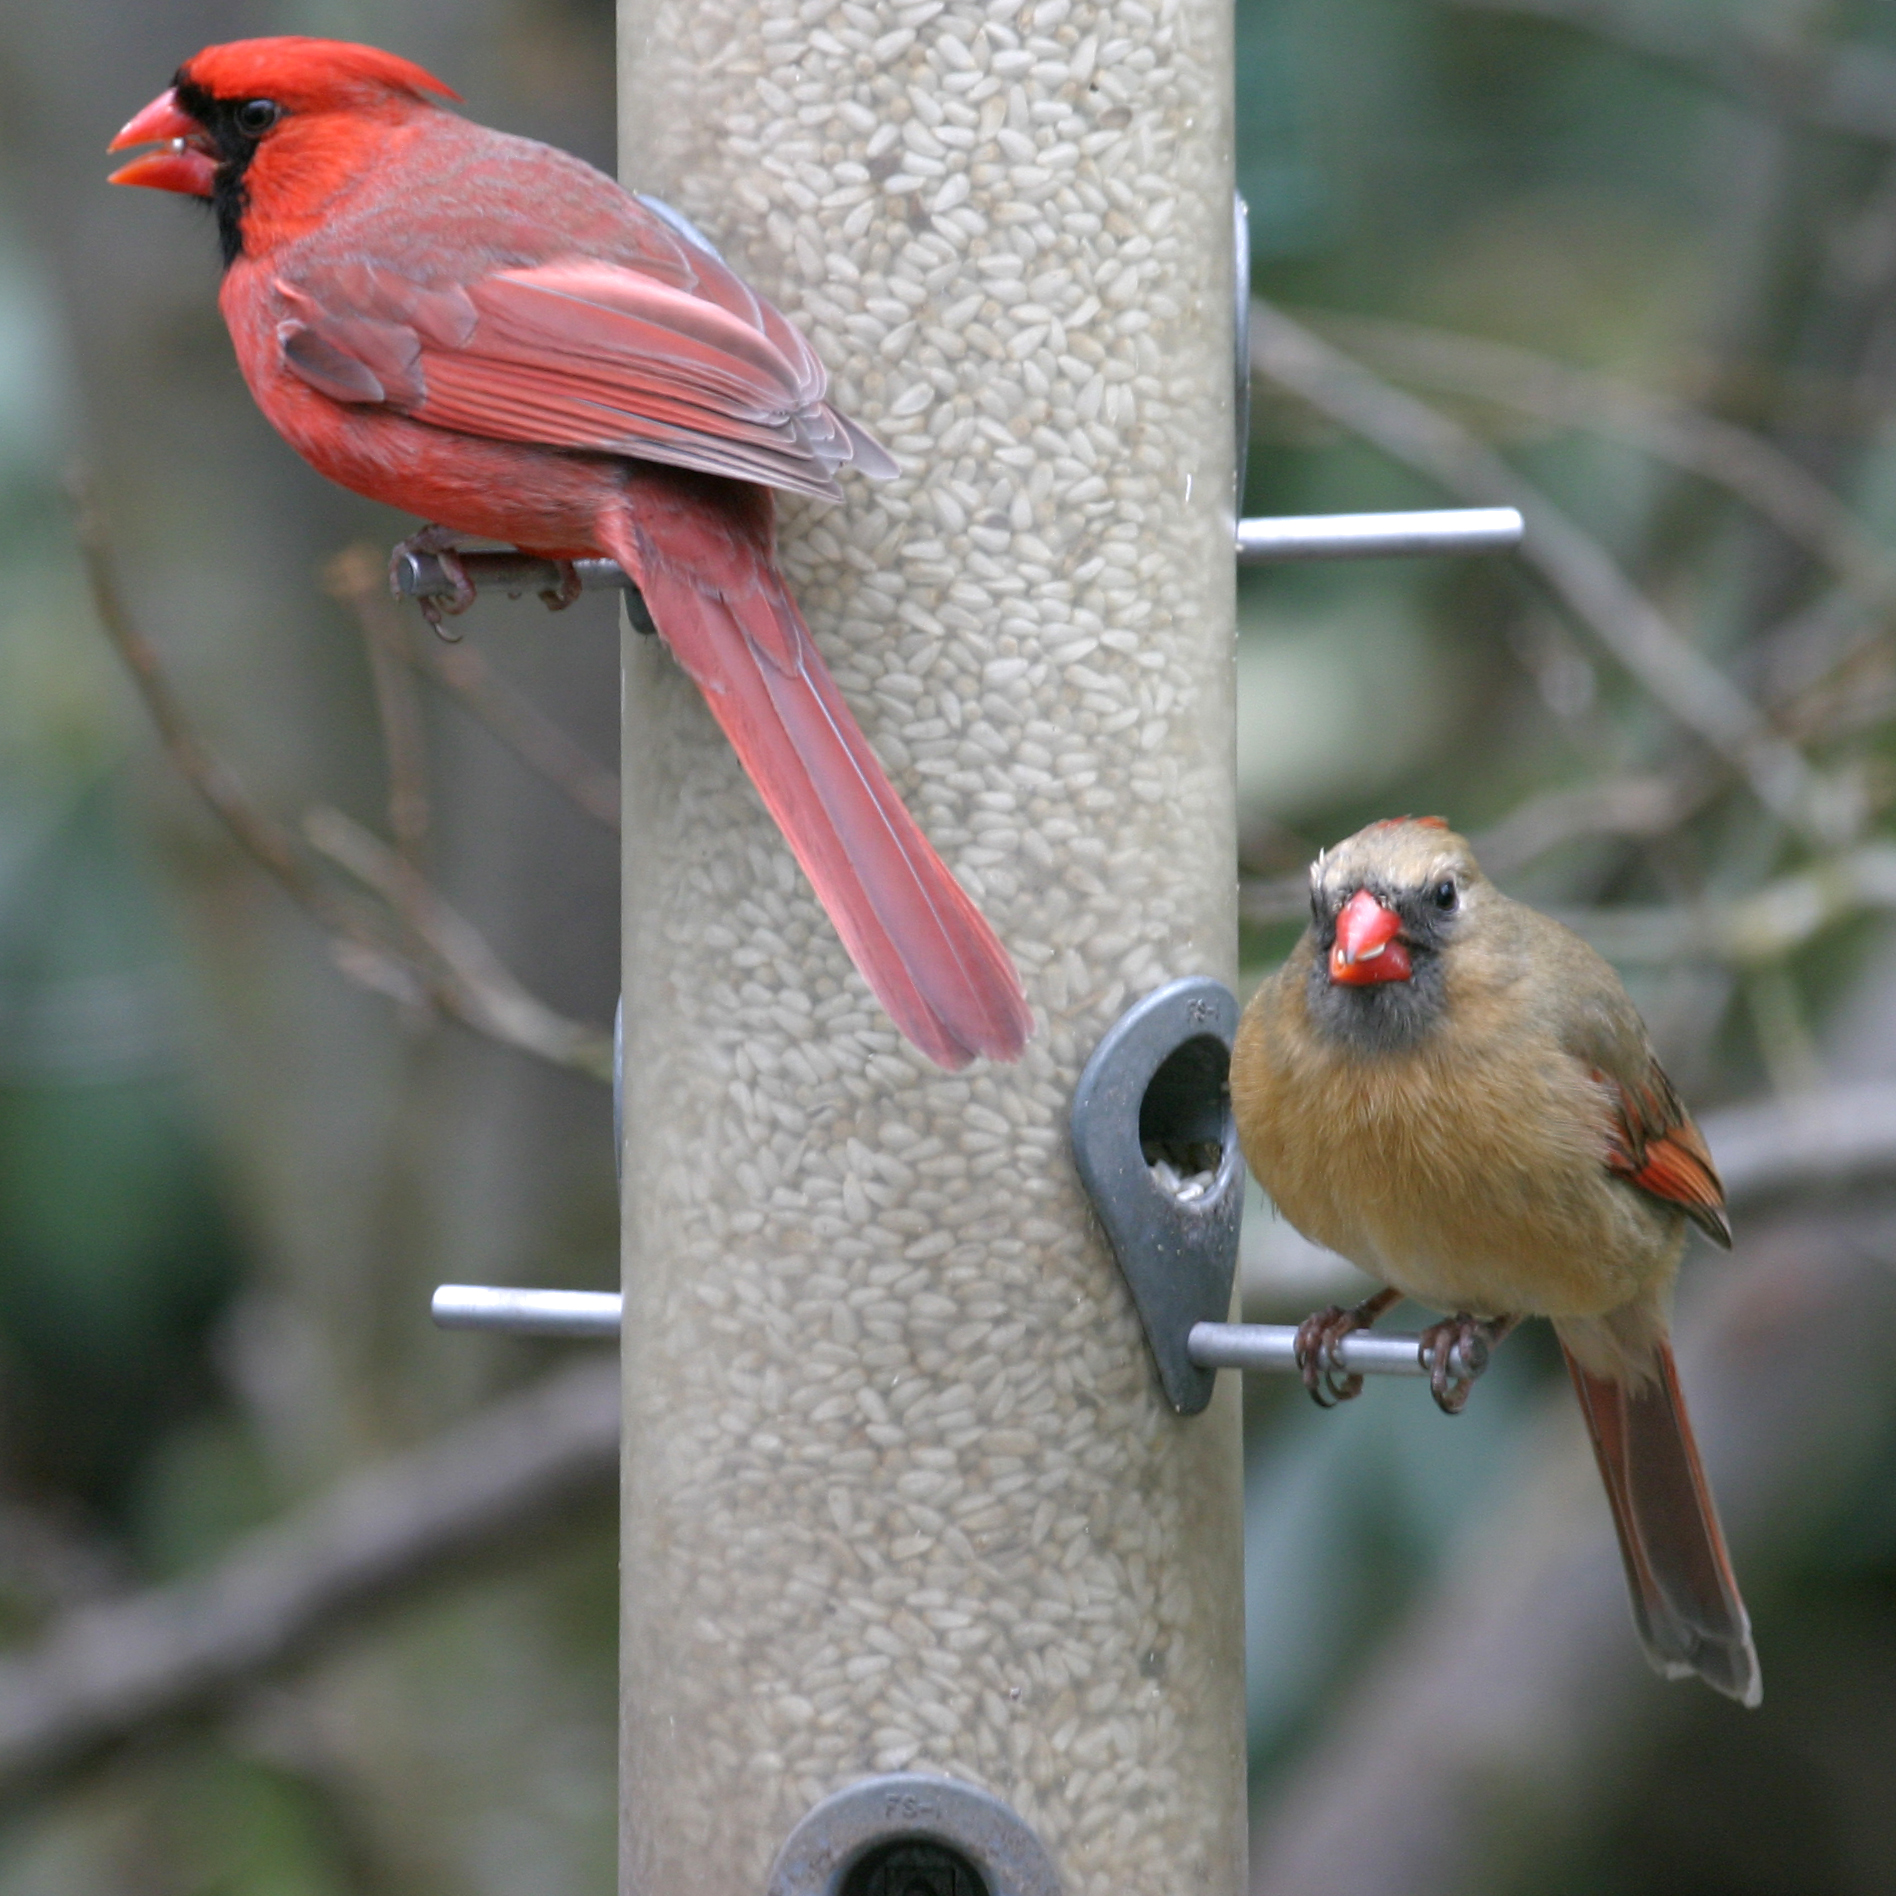 Northern cardinal, photo by Larry Master